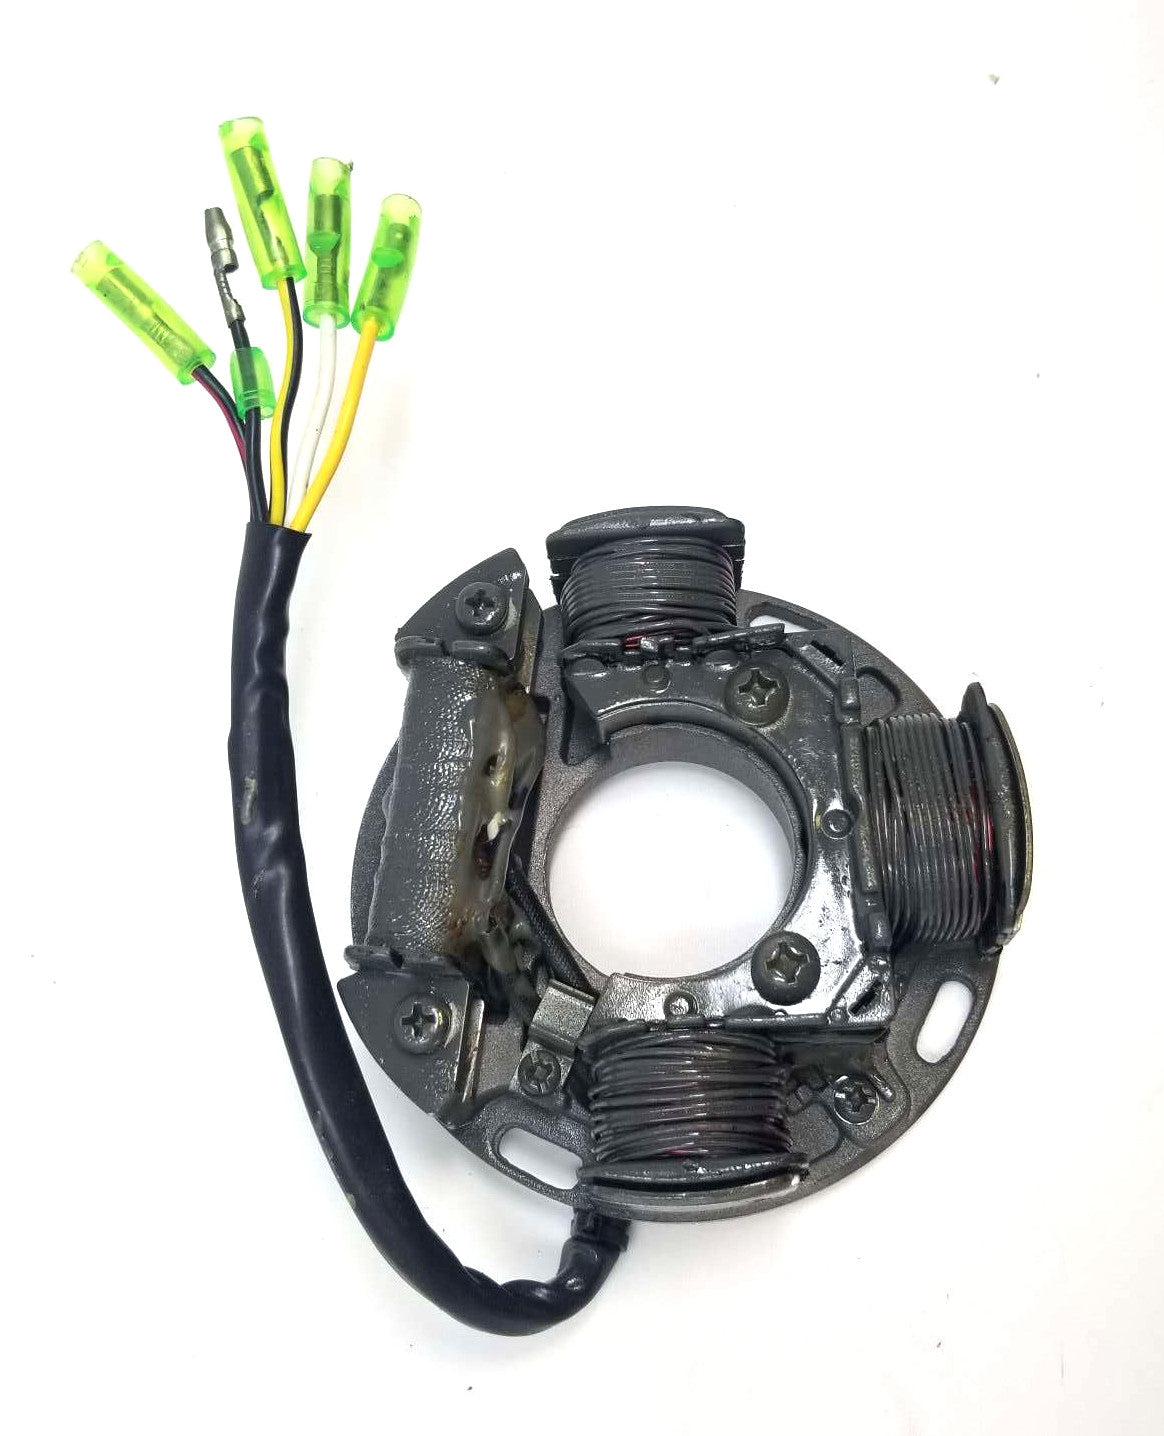 Aftermarket Stator Magneto Compatible with SEADOO OEM# 420995106, 290995104 1993-1994 XP 650 1994 SPEEDSTER